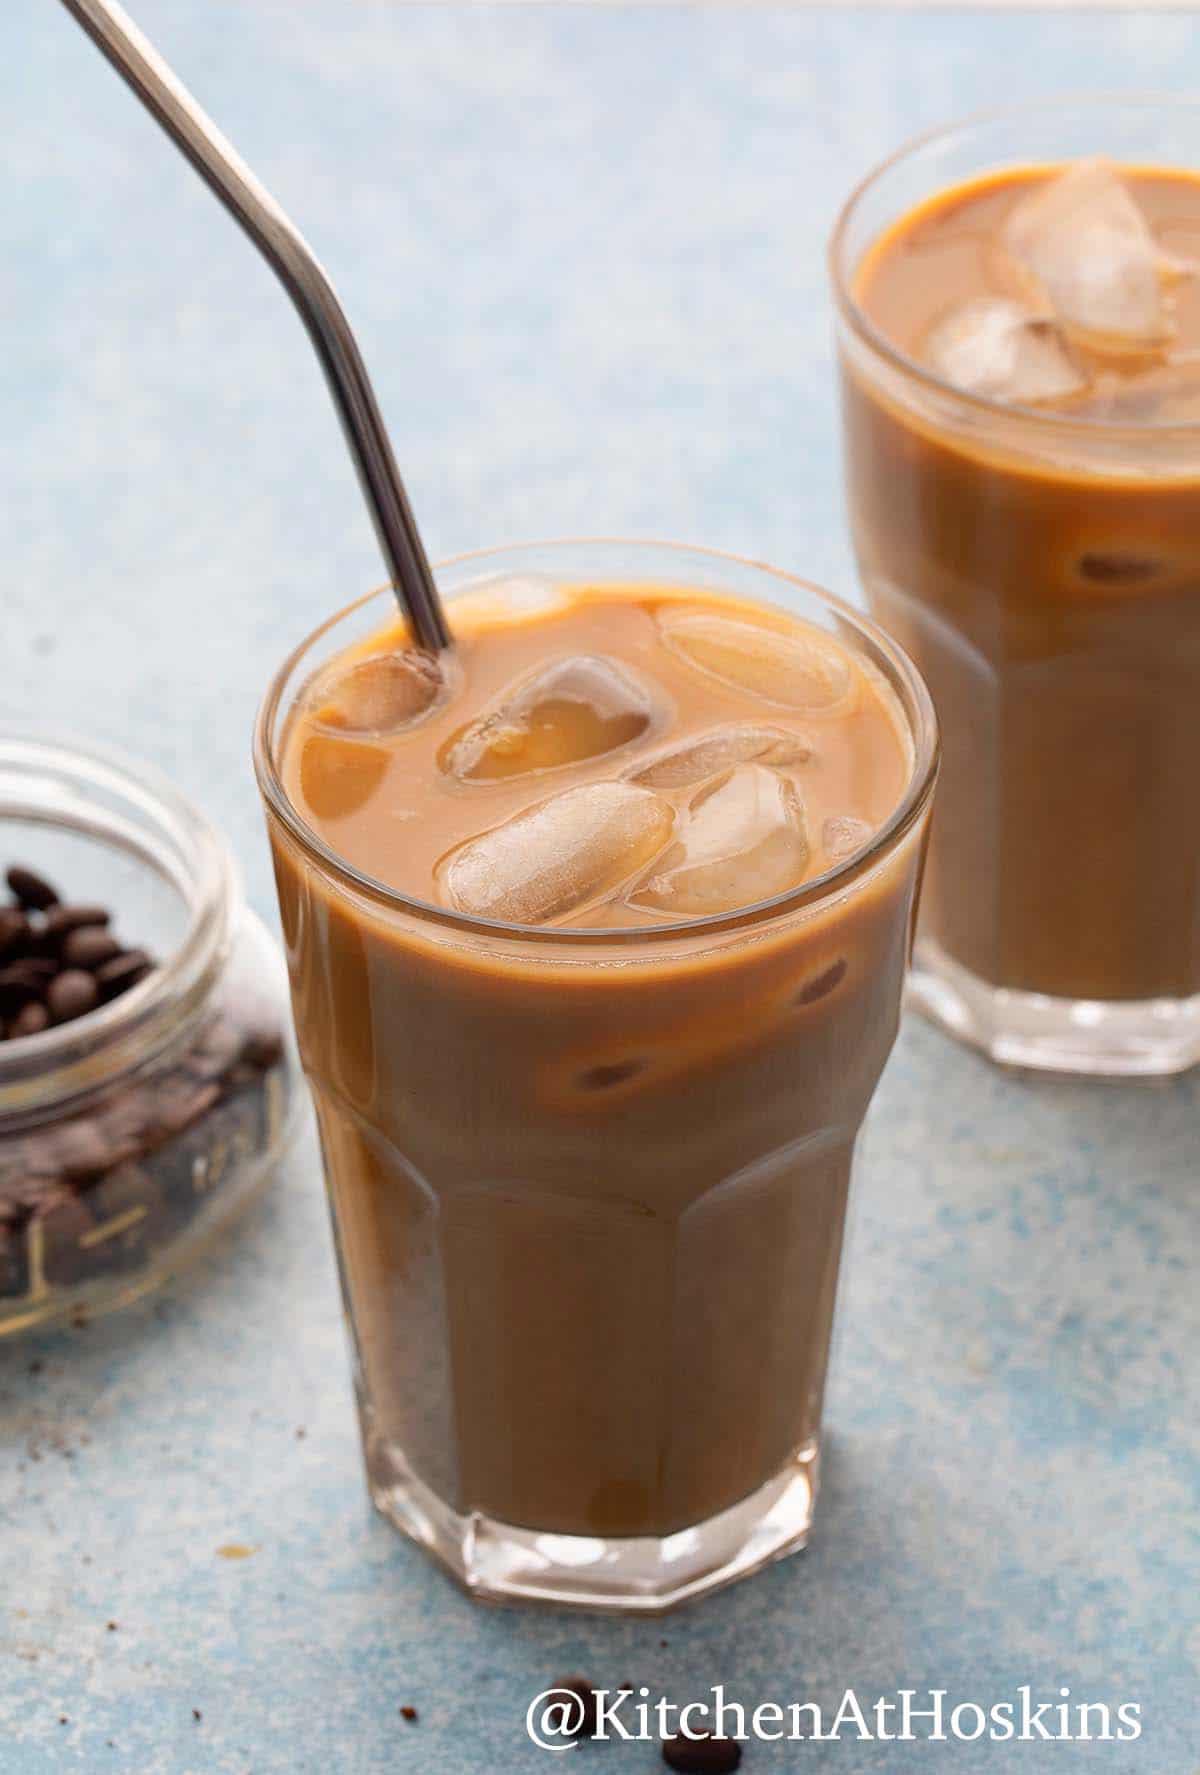 https://www.kitchenathoskins.com/wp-content/uploads/2022/04/iced-coffee-with-instant-coffee-4.jpg